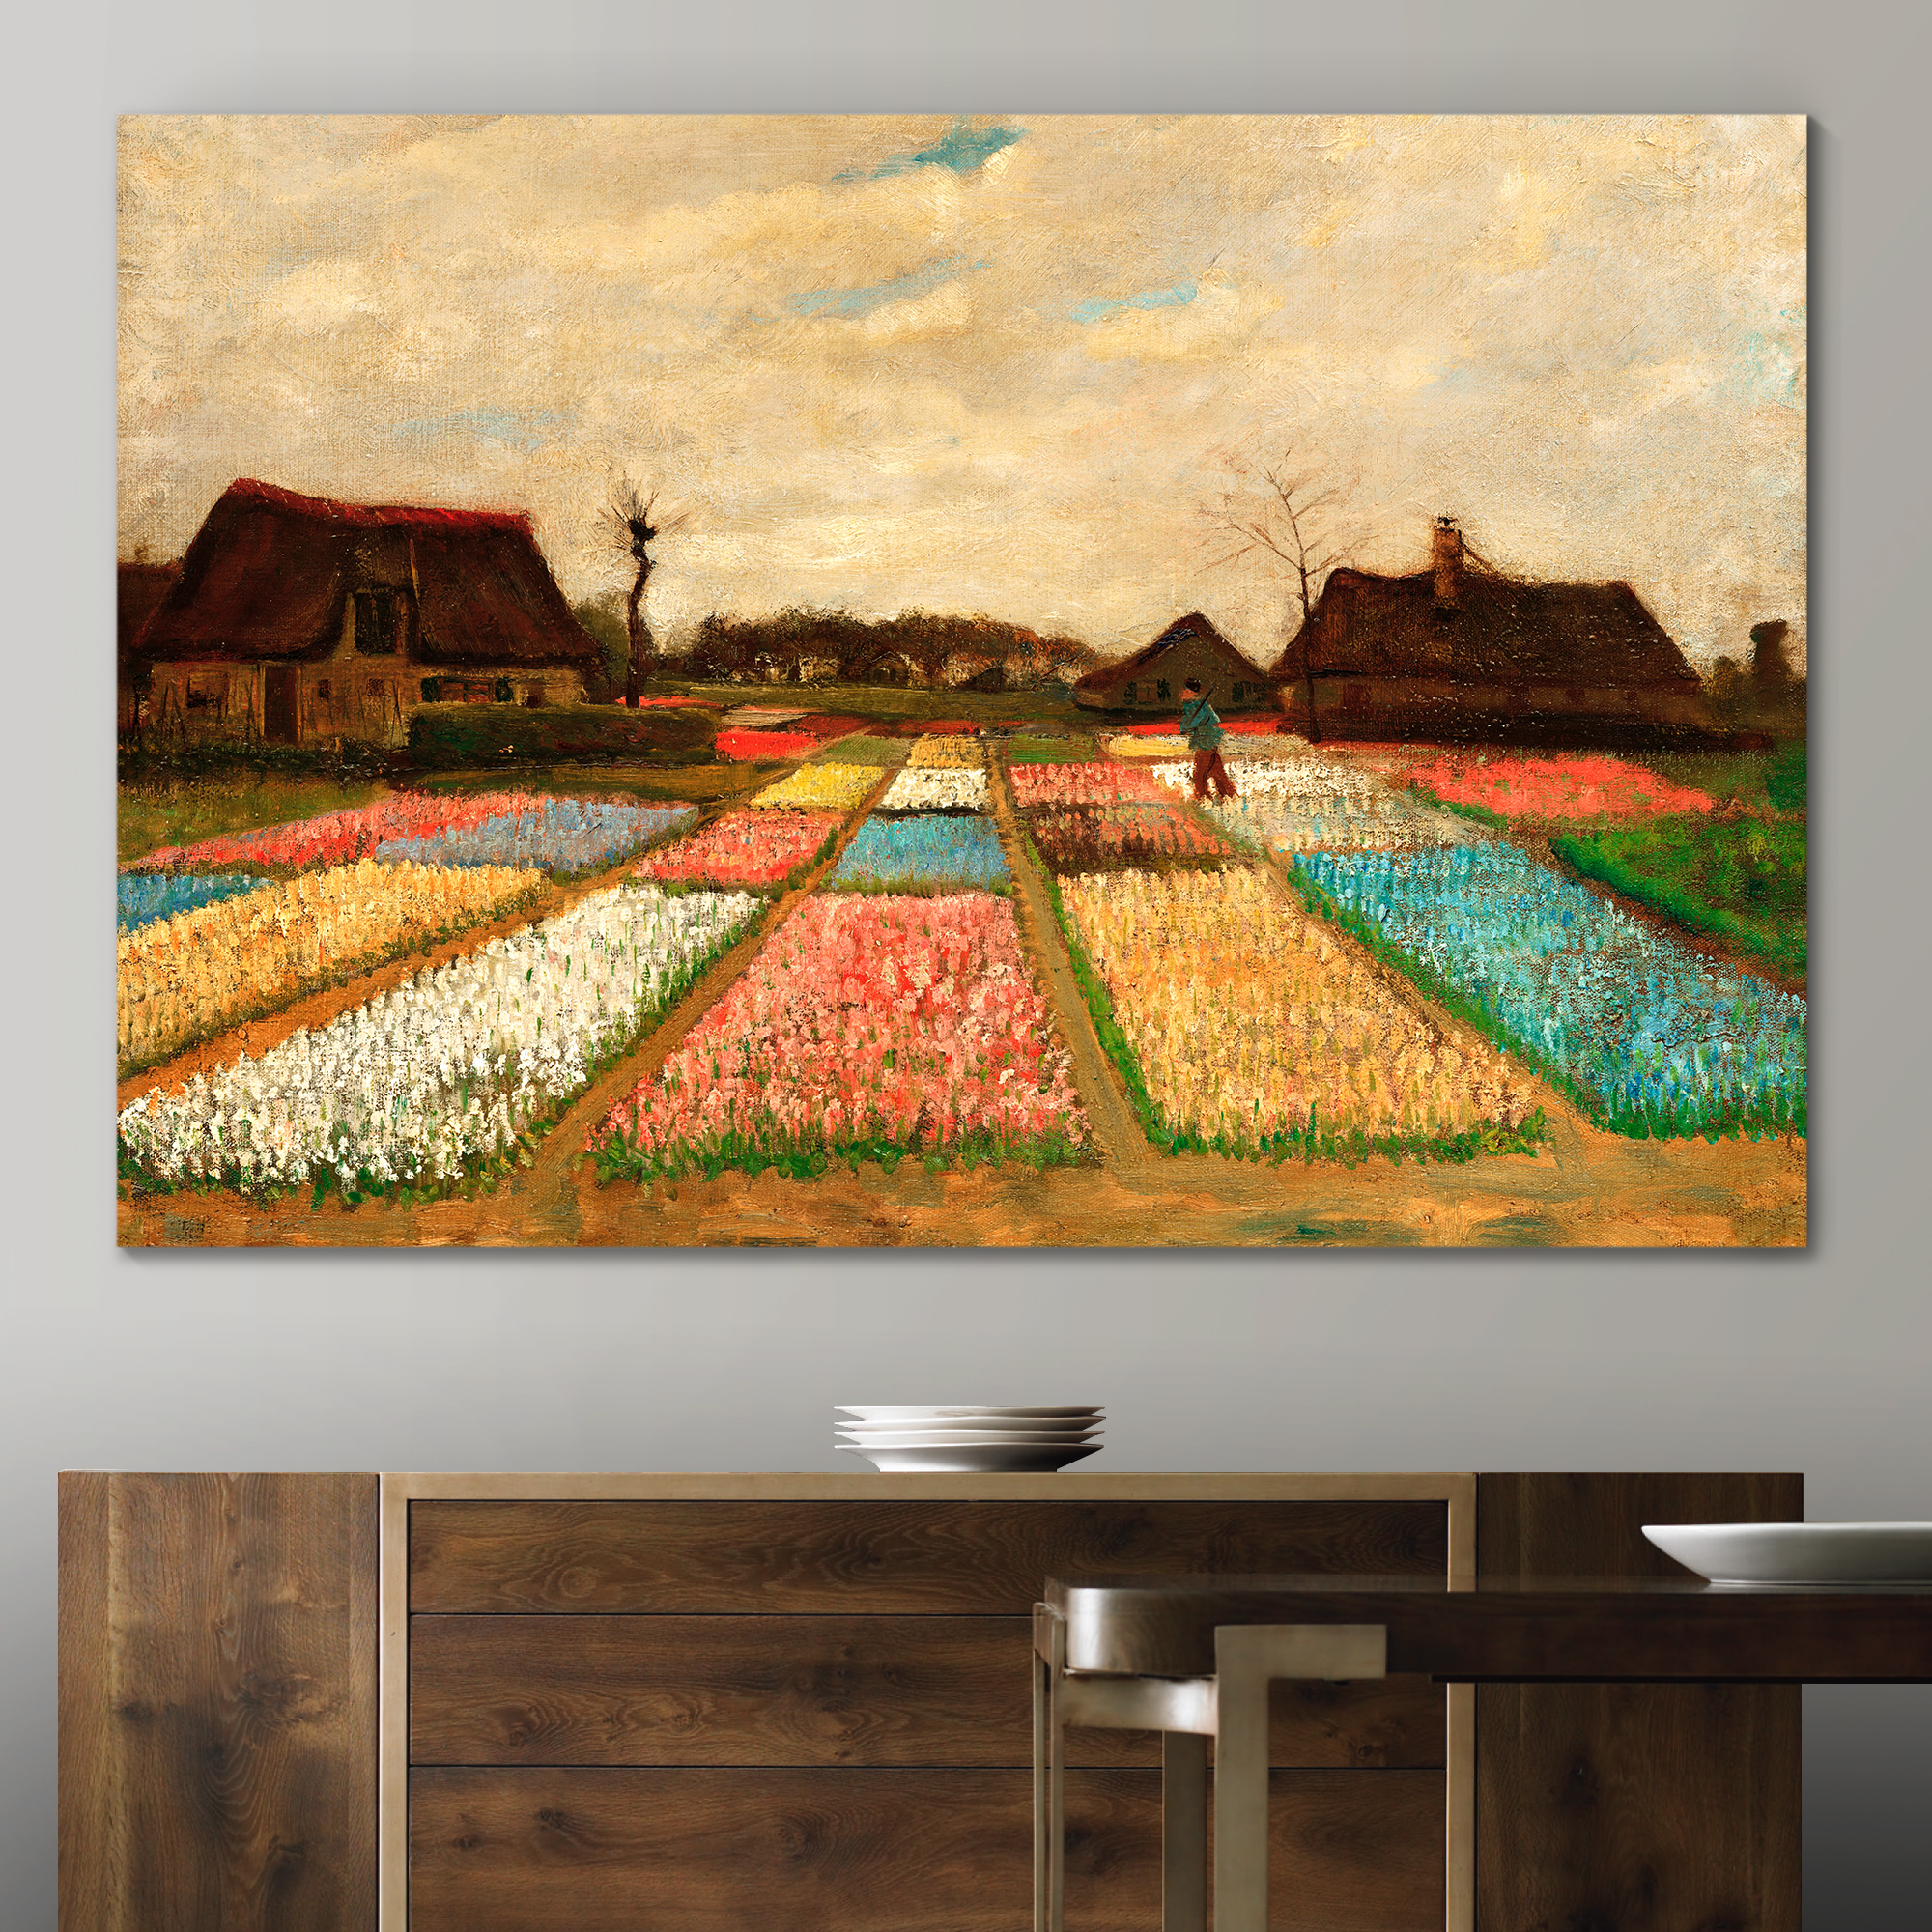 Bulb Fields (Also Called Flower Beds in Holland) by Vincent Van Gogh - Oil Painting Reproduction on Canvas Prints Wall Art, Ready to Hang - 24